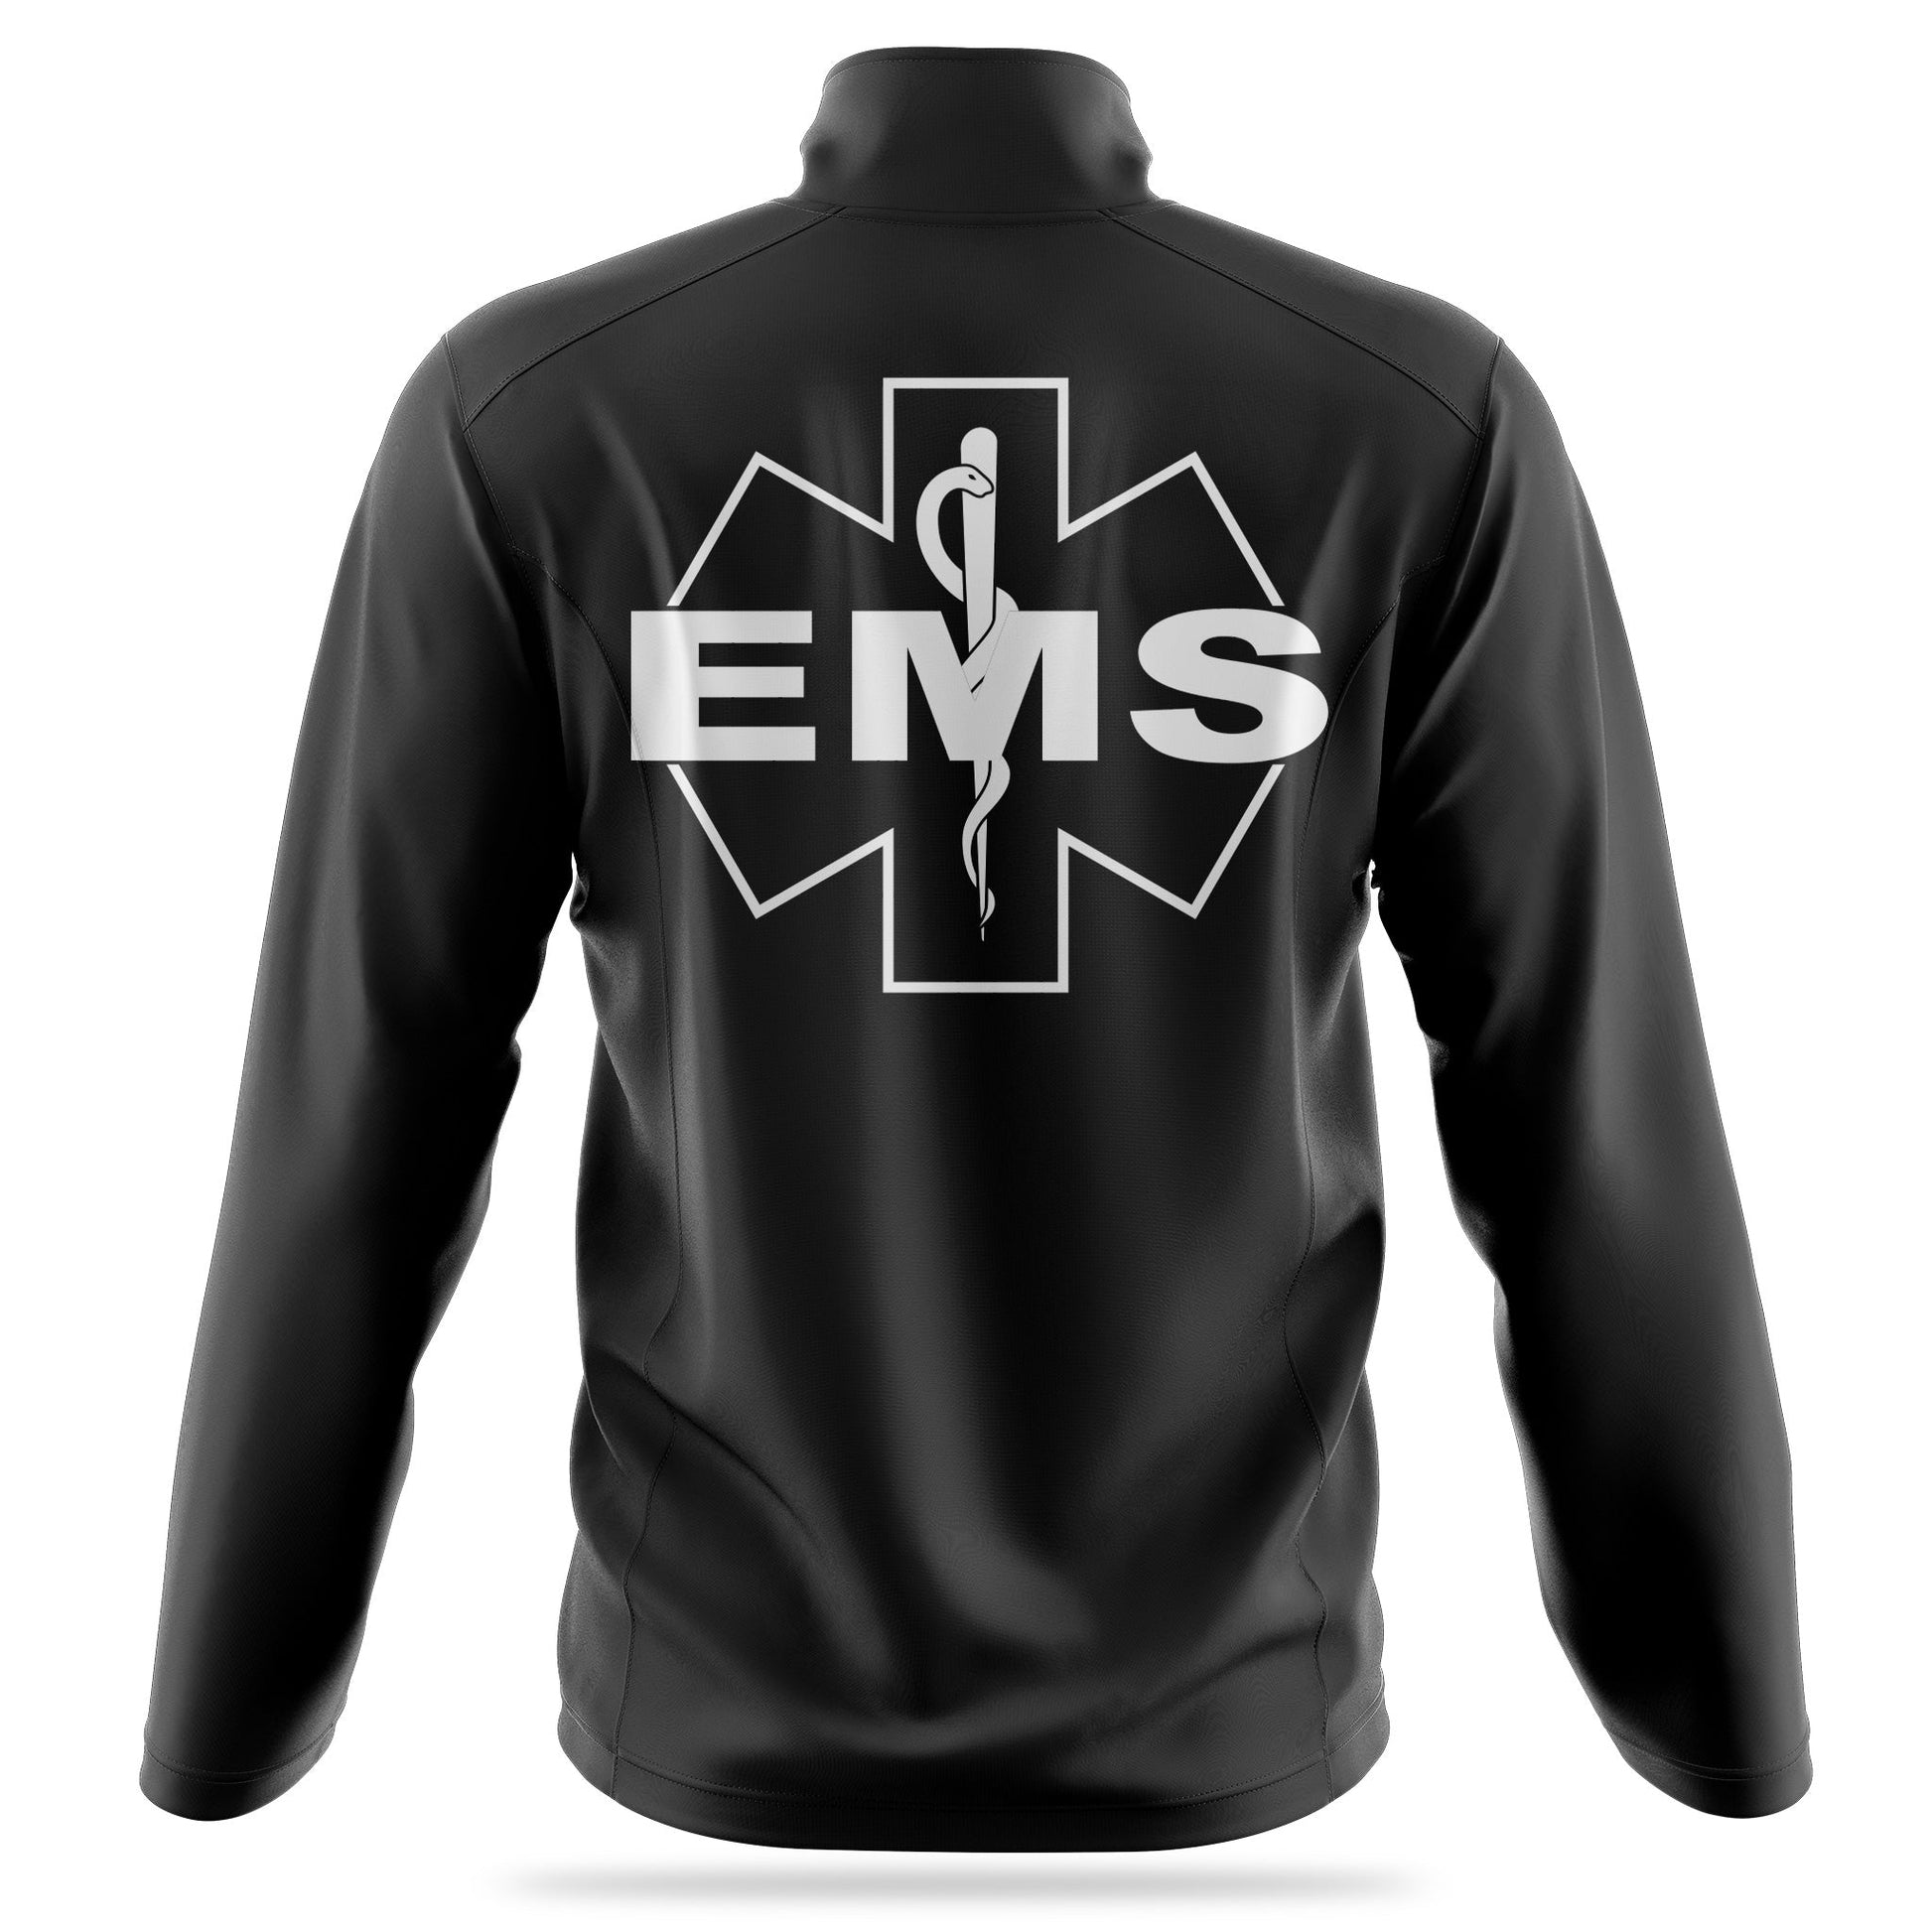 [EMS] Soft Shell Jacket [BLK/WHT]-13 Fifty Apparel